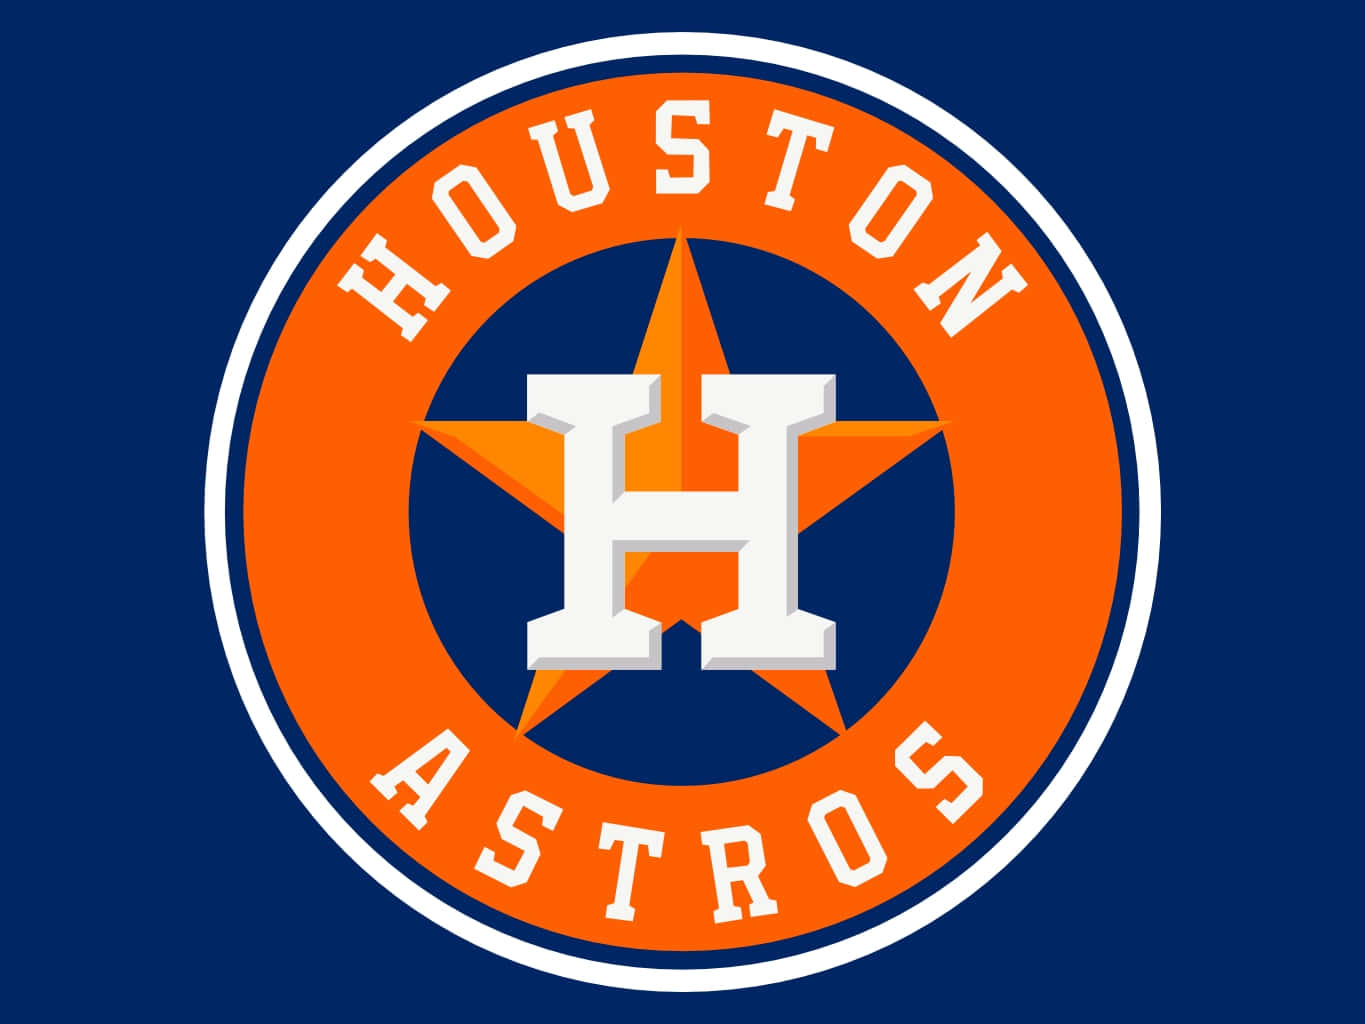 Houston Astros baseball team in action on the field